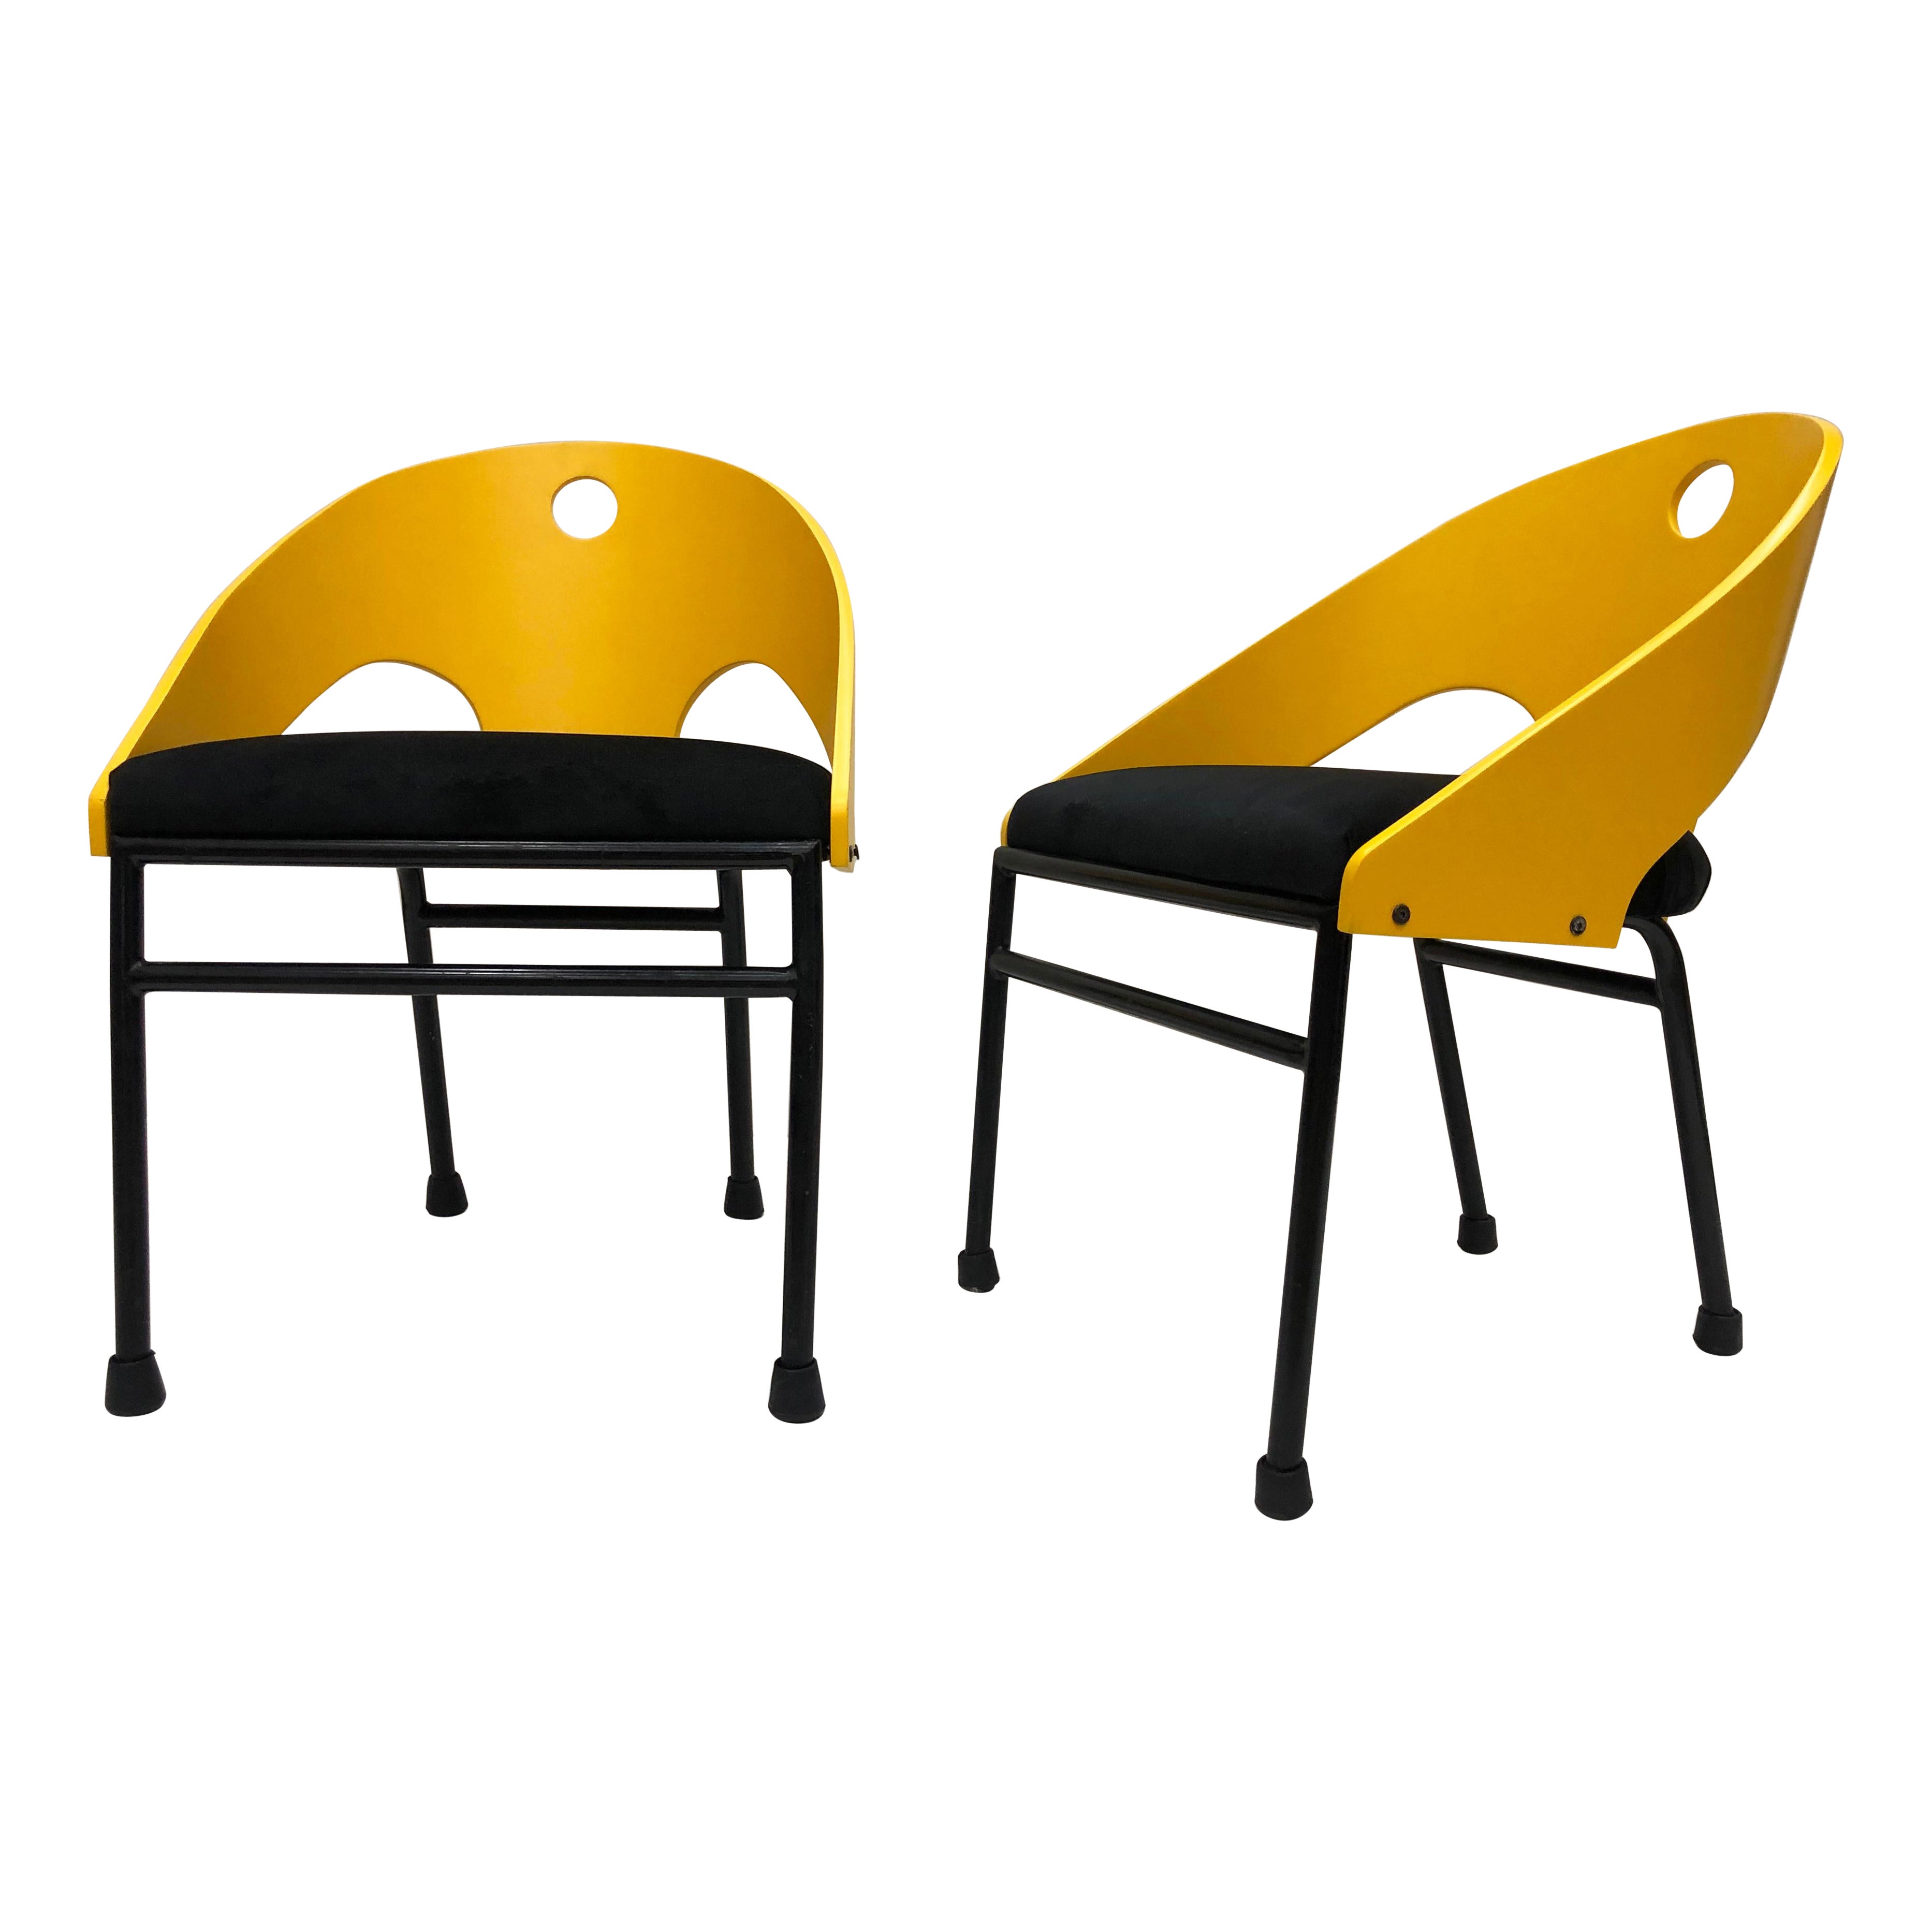 1980s Post-Modern Memphis Style Chairs, 3 Pairs Available For Sale